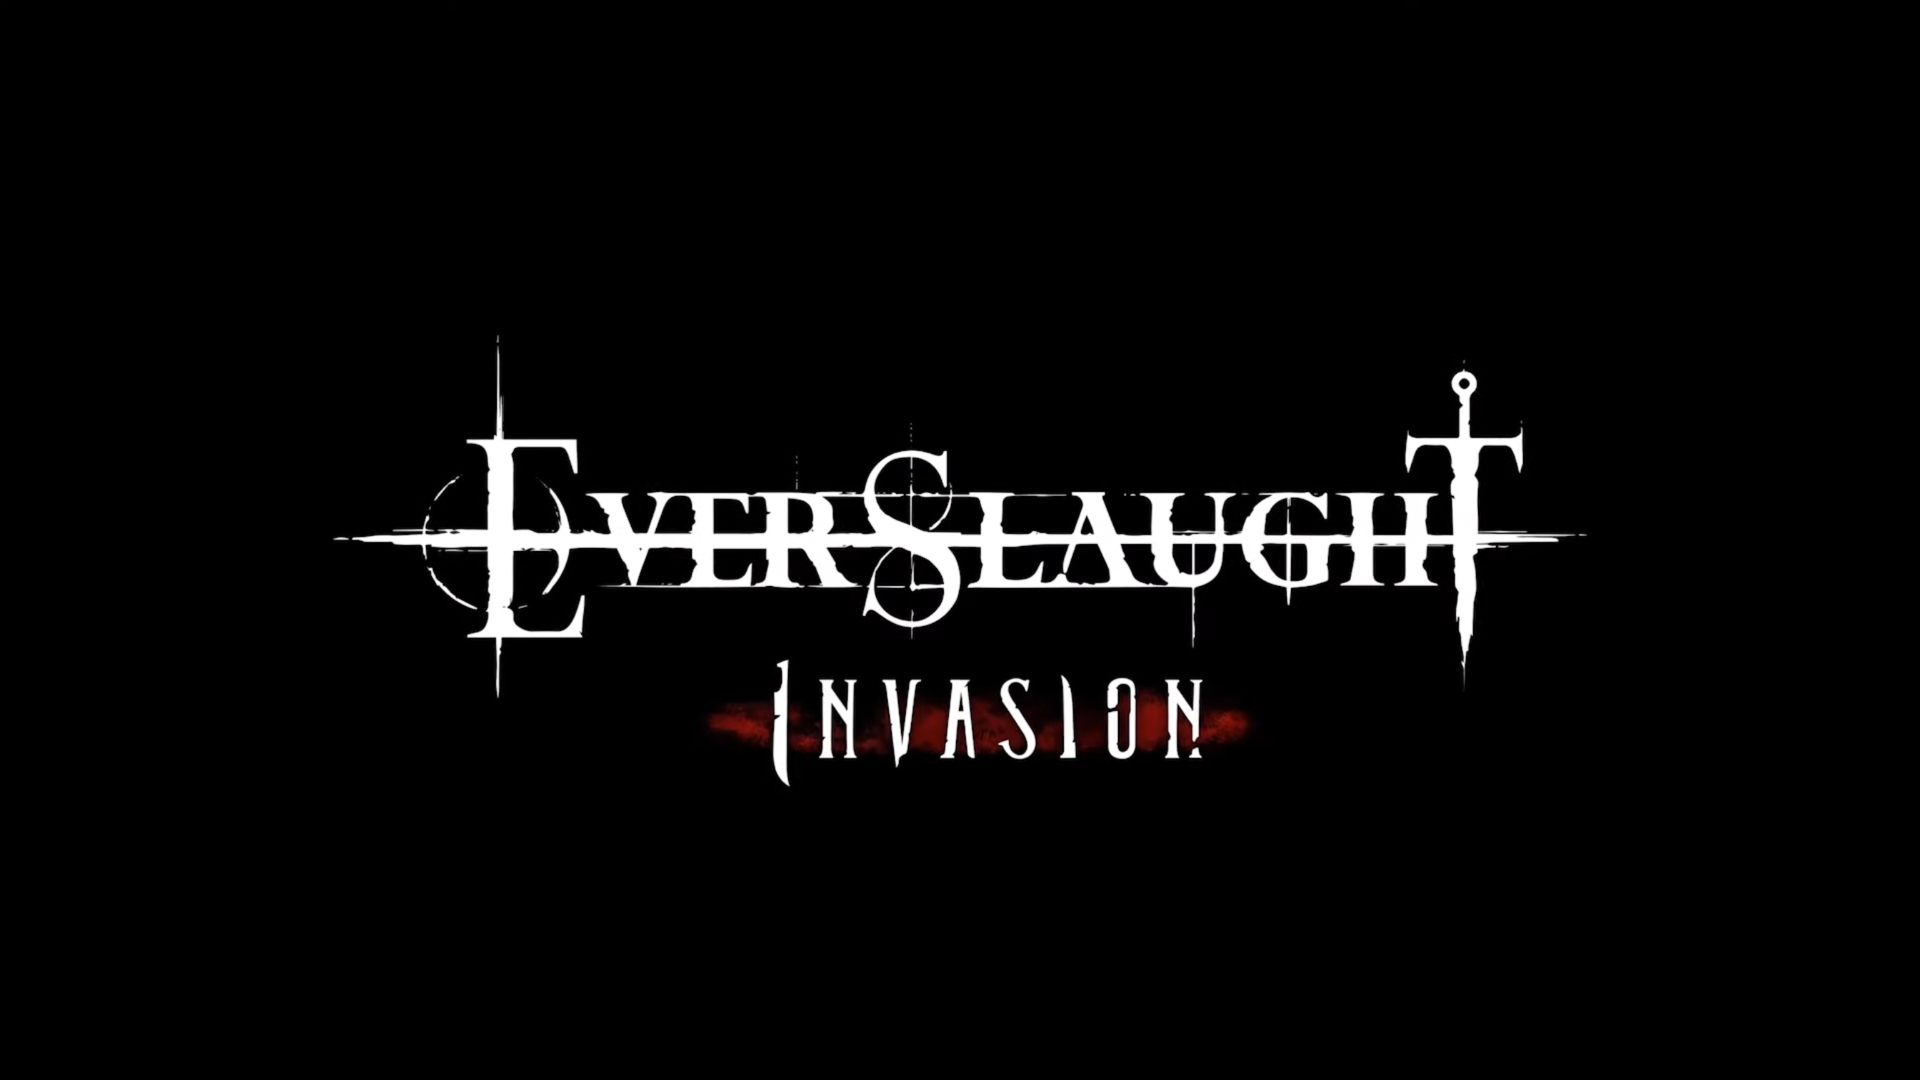 Everslaught Invasion – Launch Trailer